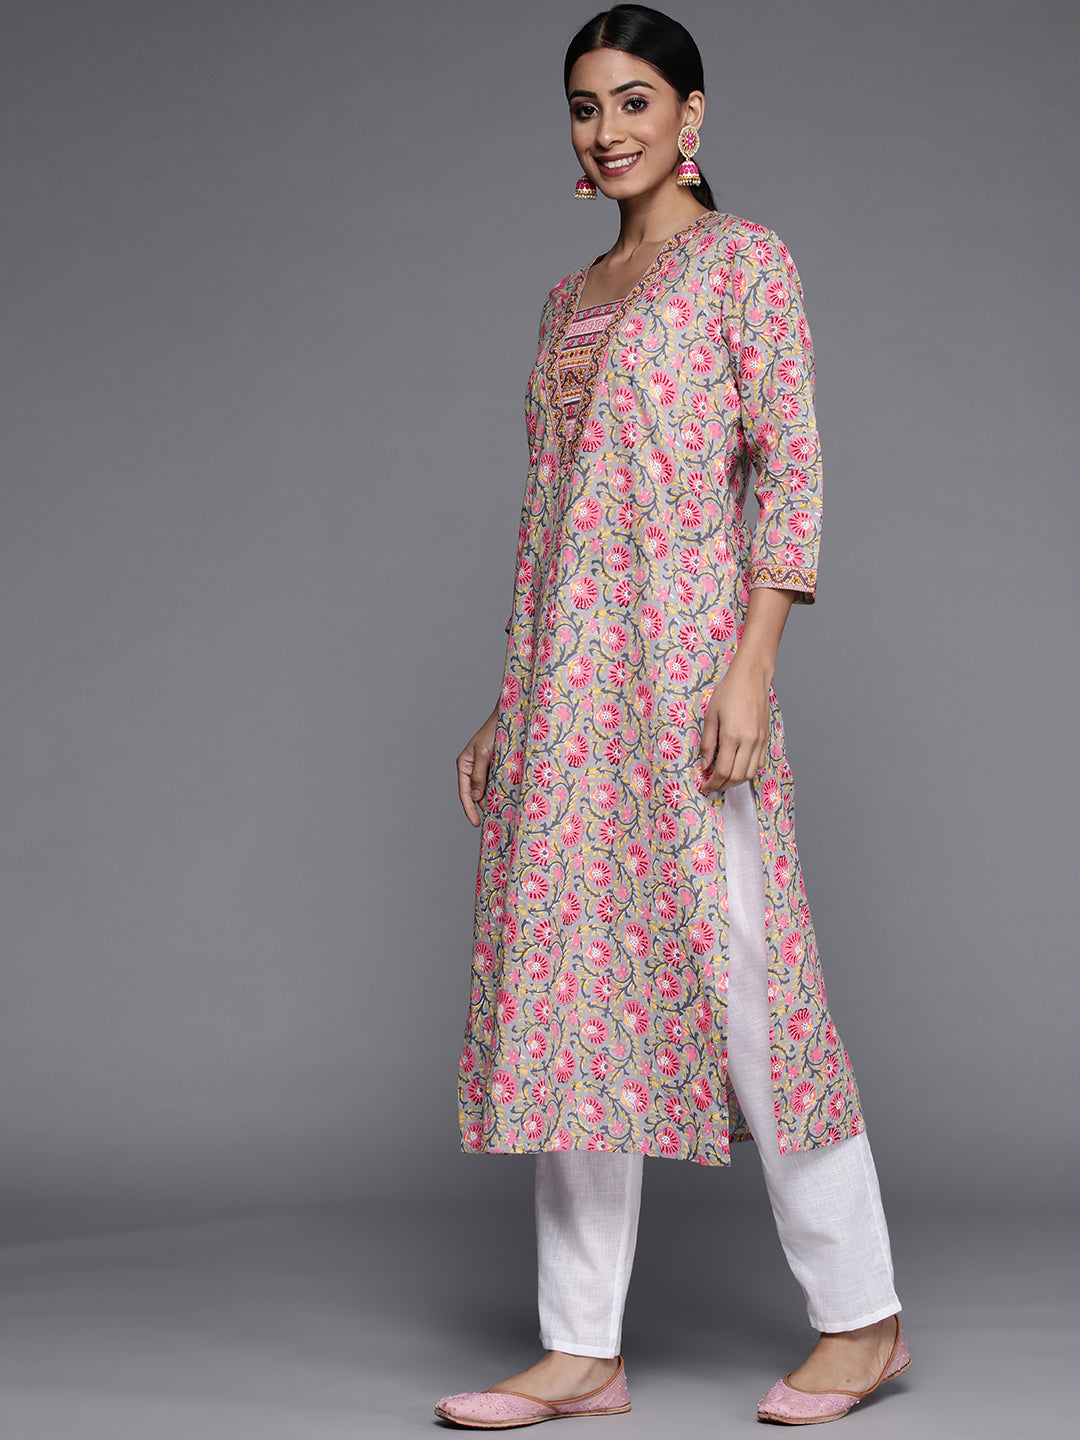 Varanga holds a prime position in the women's ethnic wear